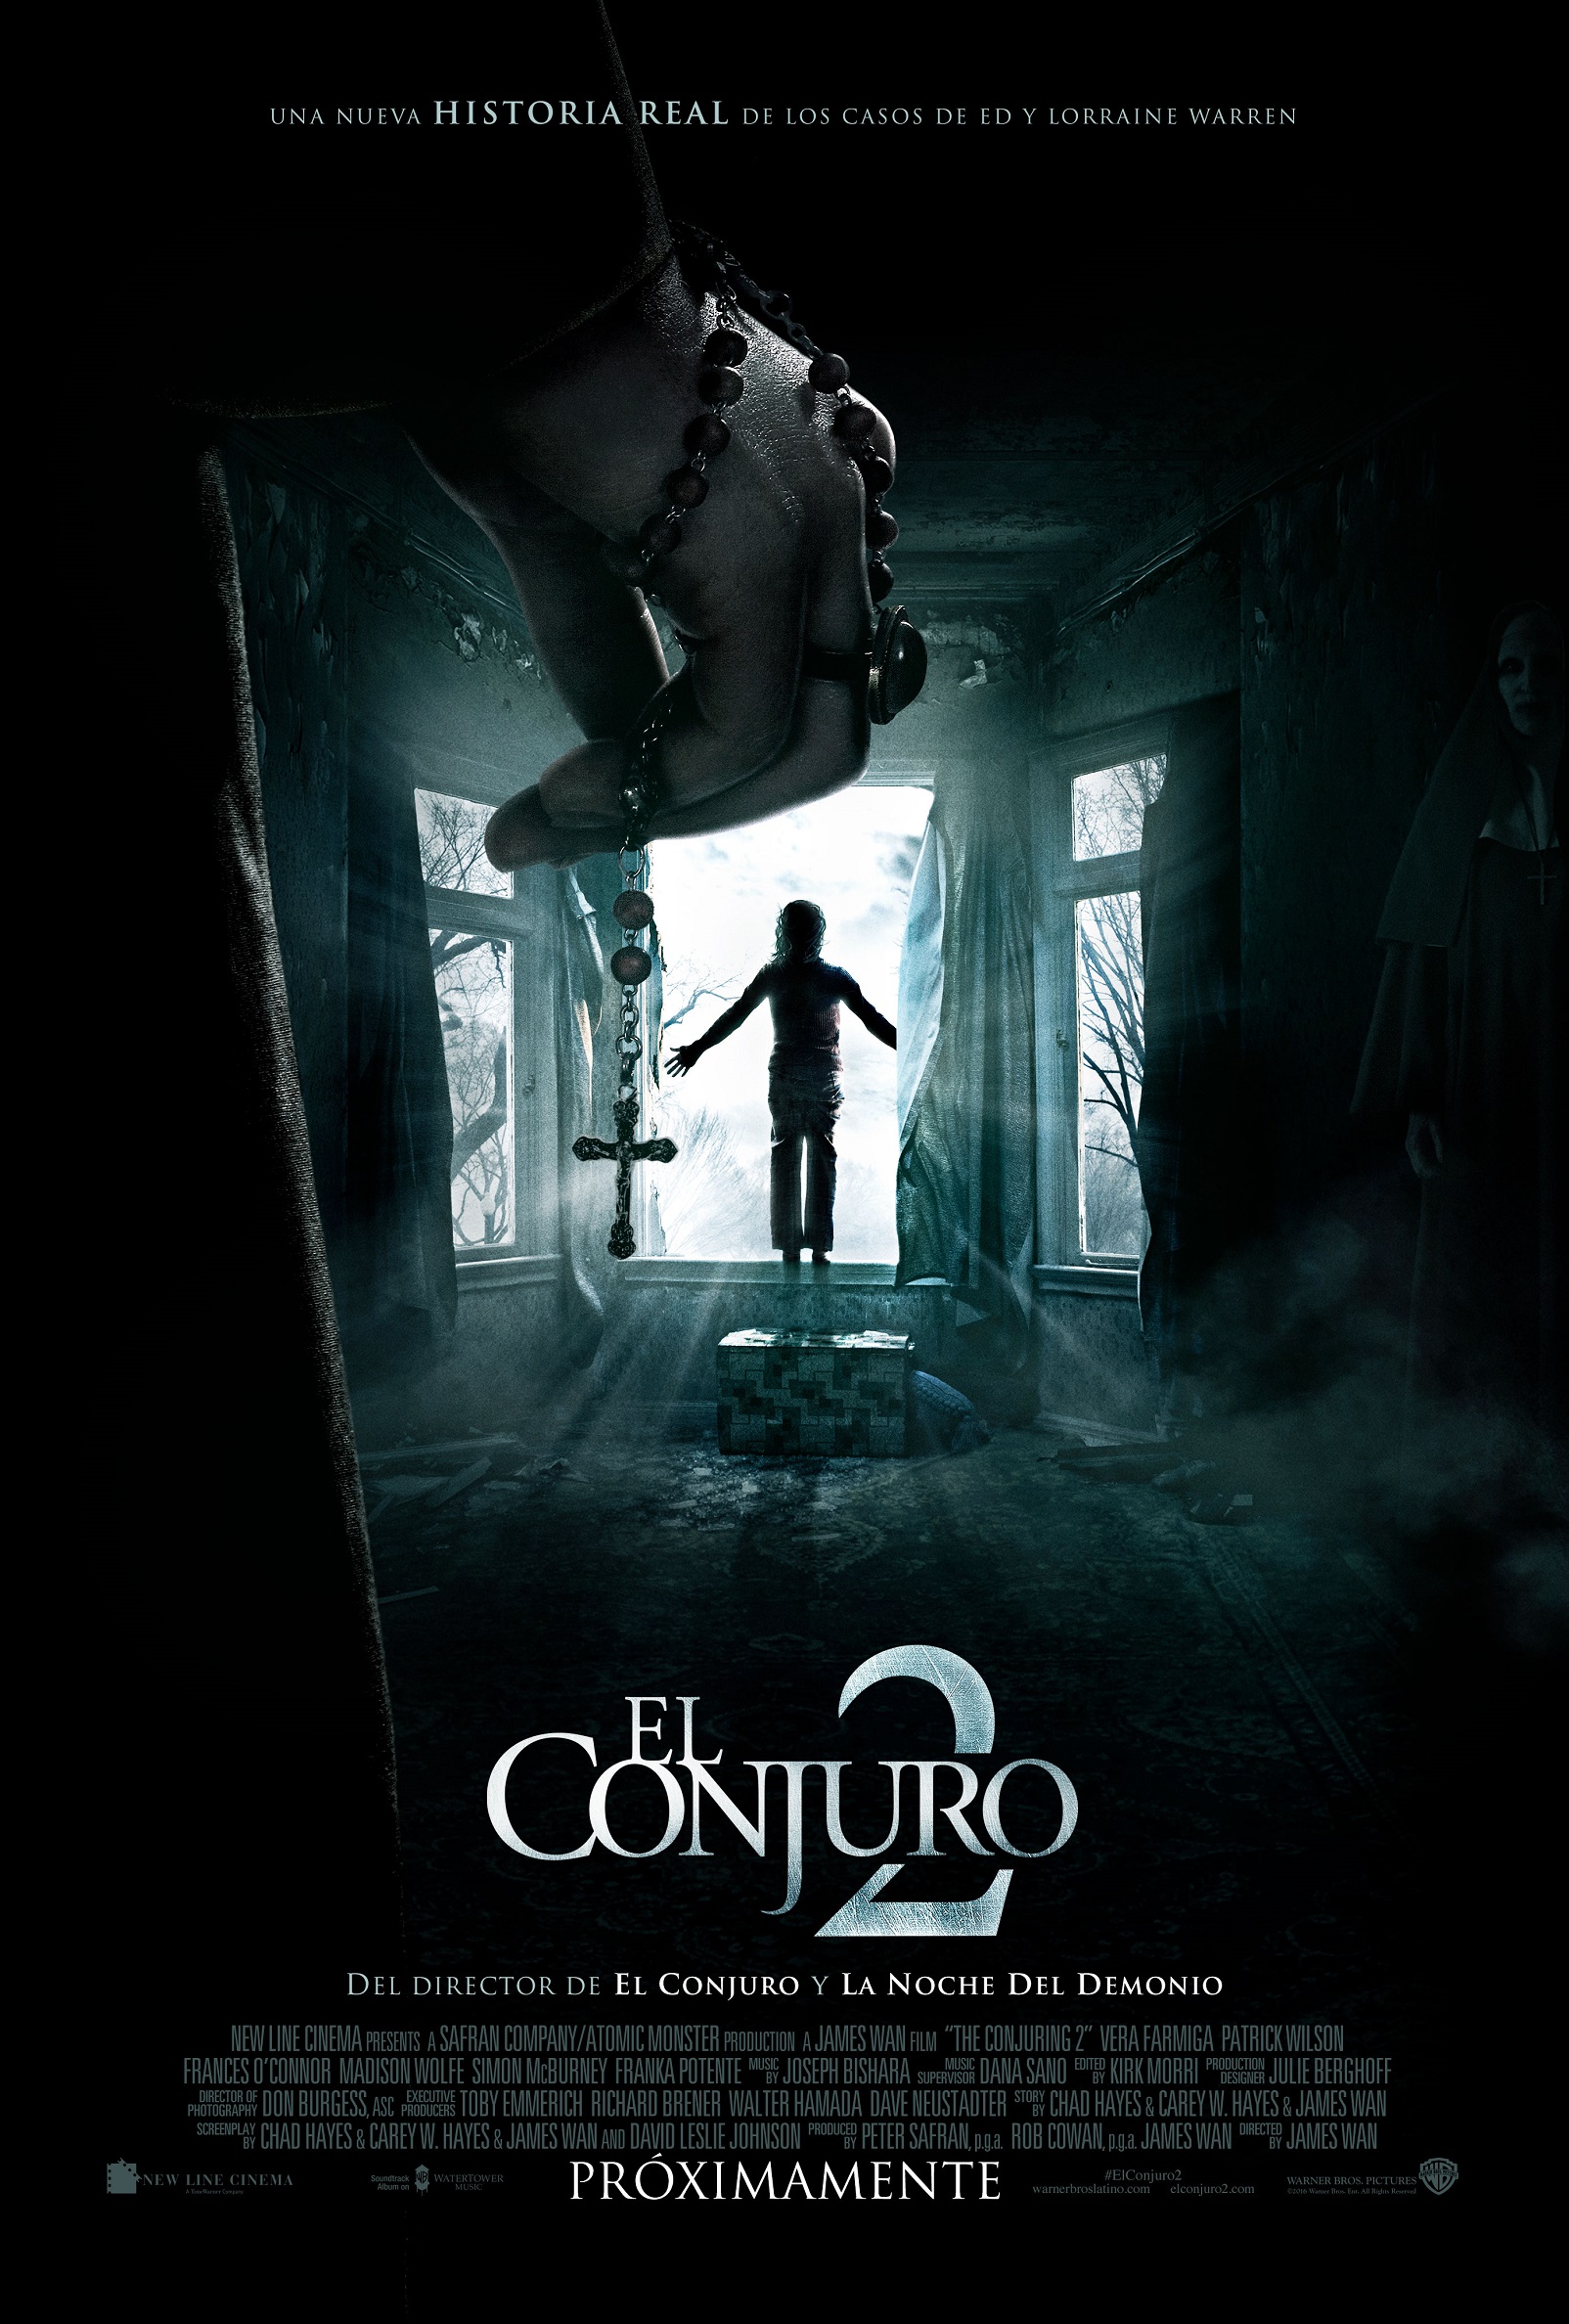 Conjuro 2 poster